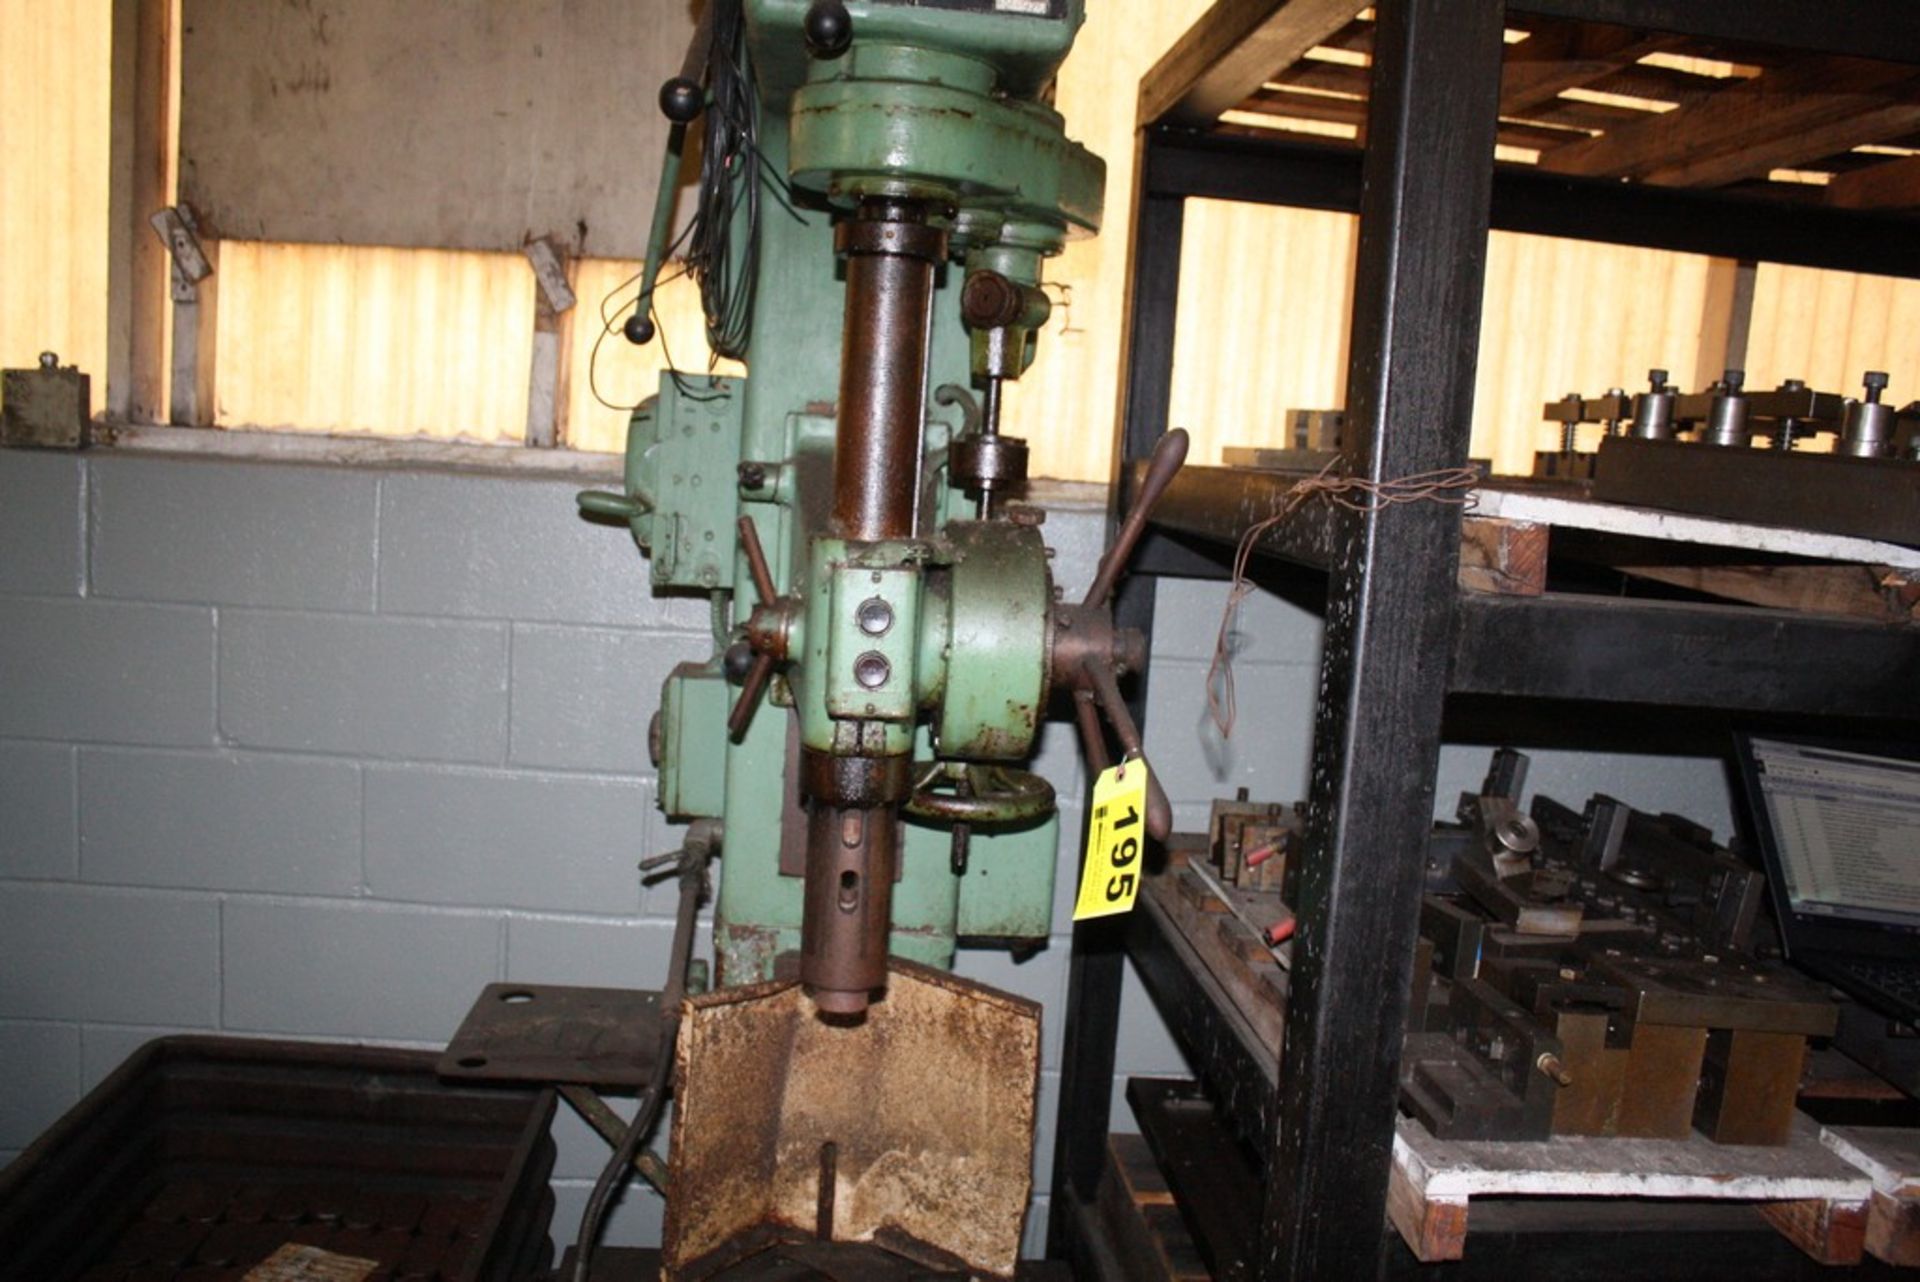 BUFFALO FORGE 26" PRODUCTION DRILL PRESS WITH POWER FEED S/N 62-875 - Image 3 of 4